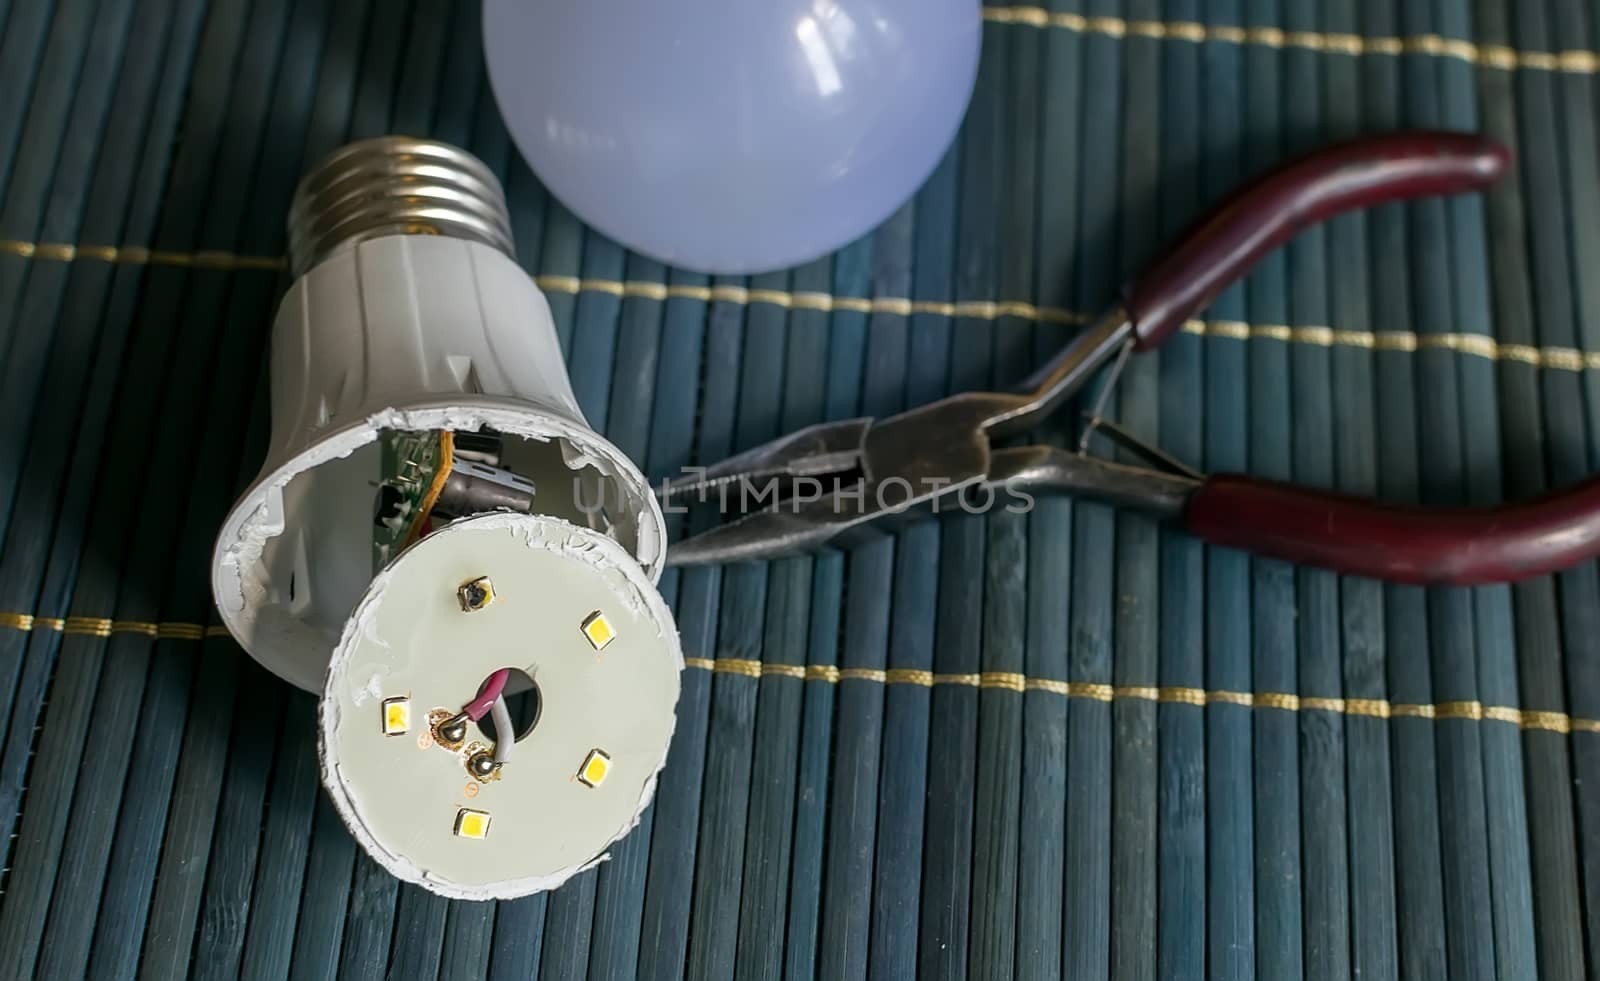 faulty, disassembled led household lamp with a burnt led element is on the table next to the pliers